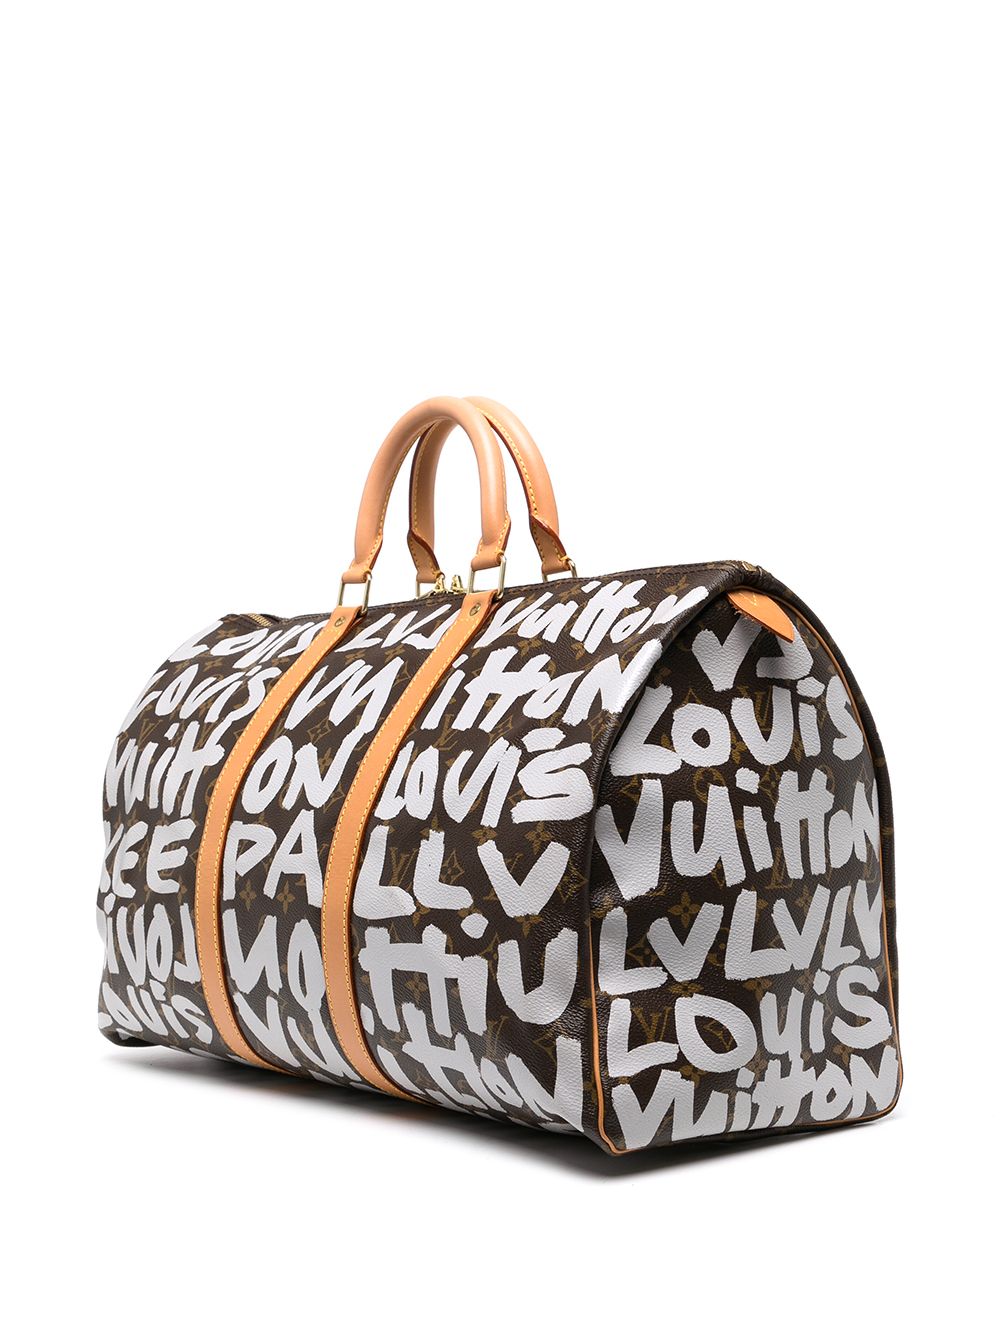 Louis Vuitton x Stephen Sprouse 2001 pre-owned Keepall 50 Holdall